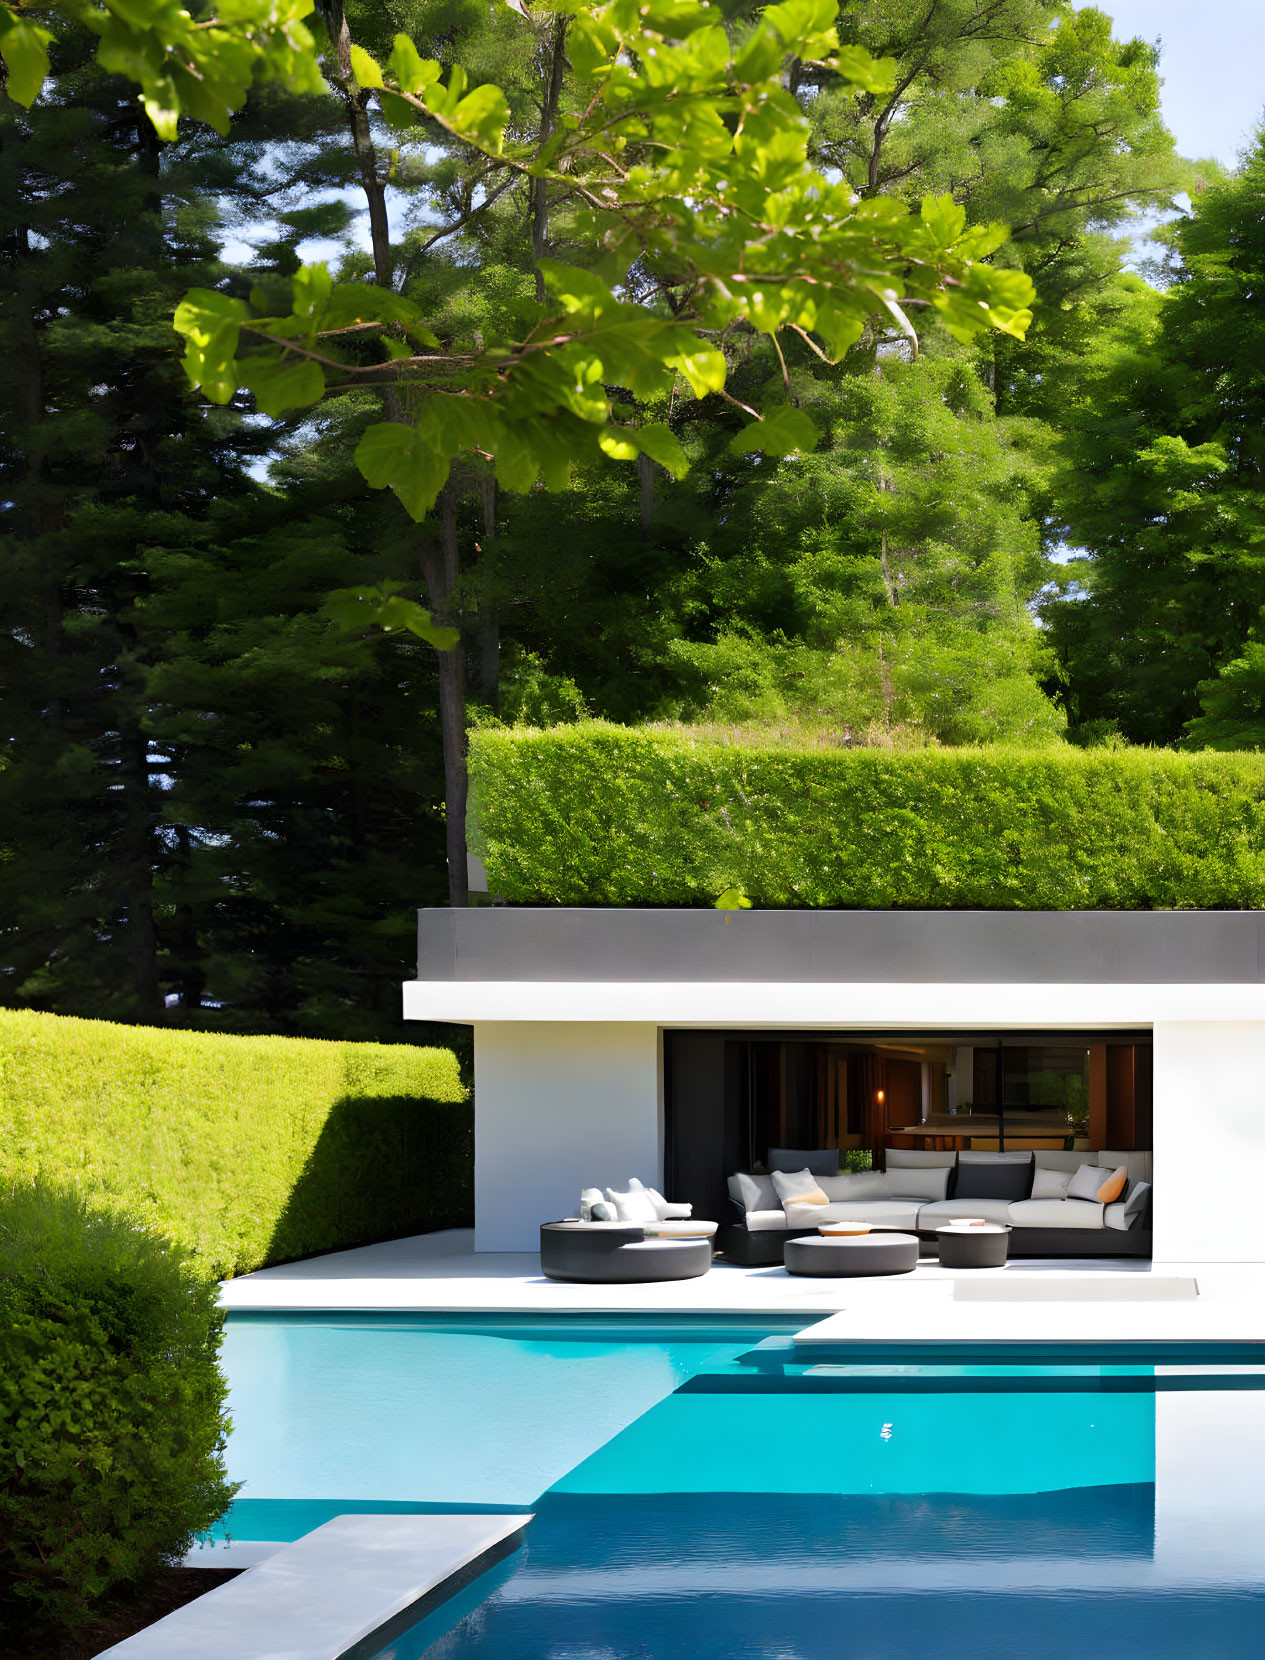 Sleek lounge by outdoor pool with manicured hedges